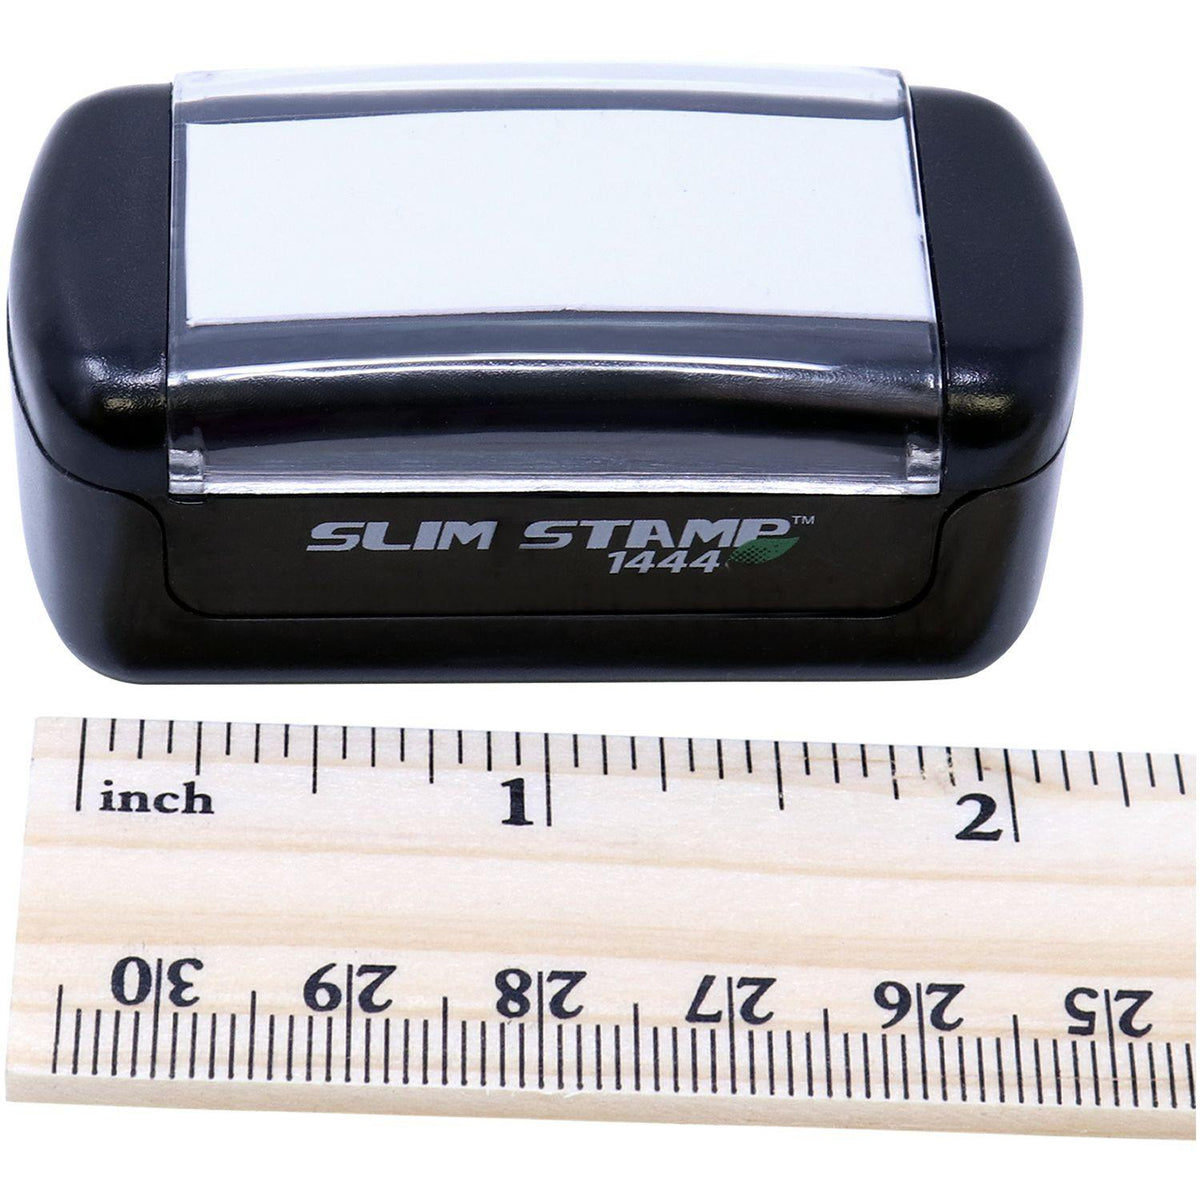 Slim Pre-Inked Bold Font File Stamp - Engineer Seal Stamps - Brand_Slim, Impression Size_Small, Stamp Type_Pre-Inked Stamp, Type of Use_General, Type of Use_Office